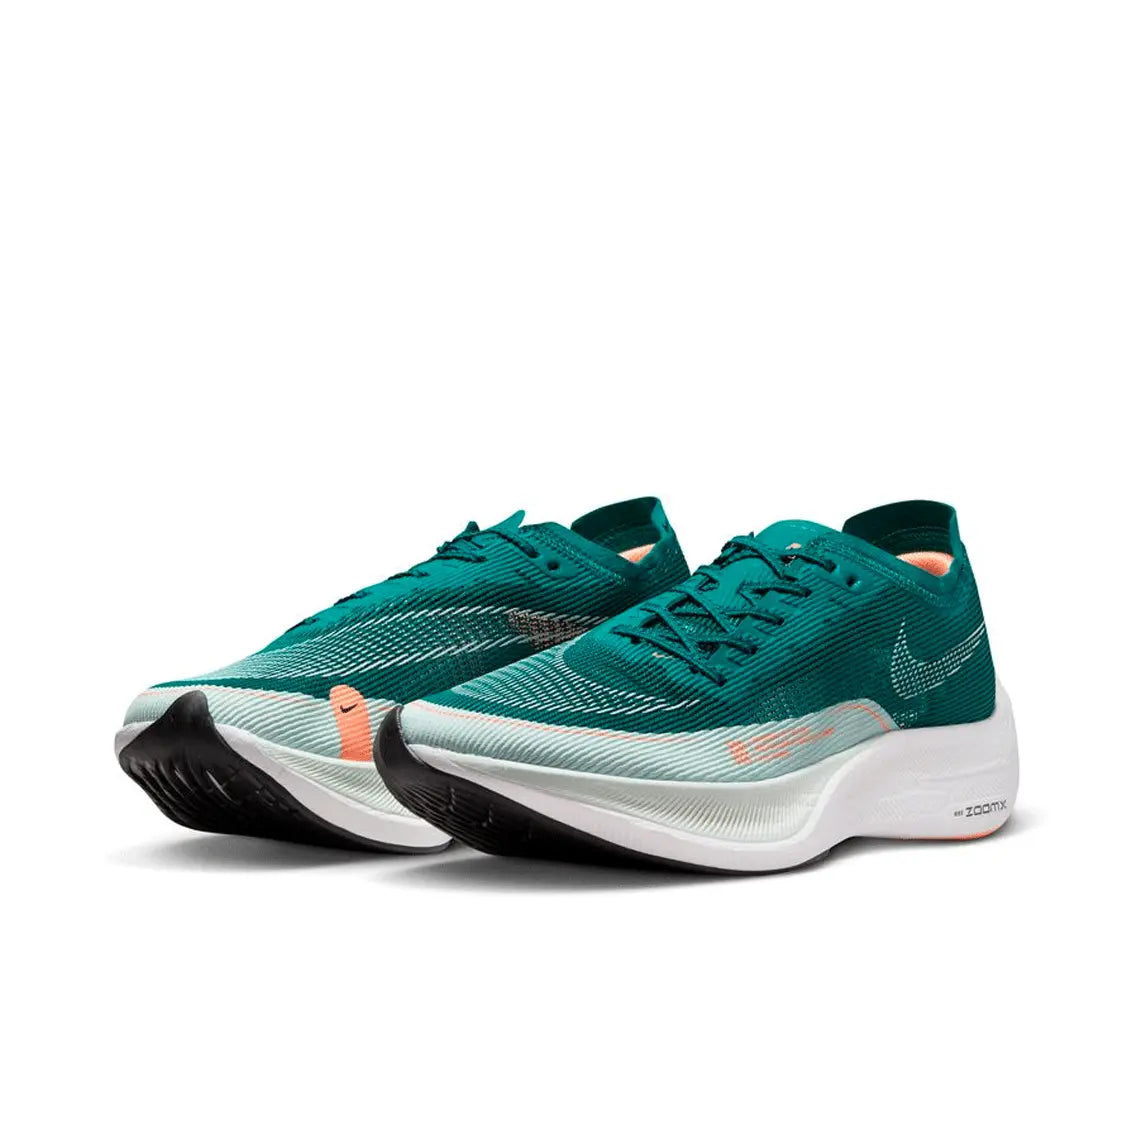 Mens Nike ZoomX Vaporfly Next% 2 - Bright Spruce / Barely Green